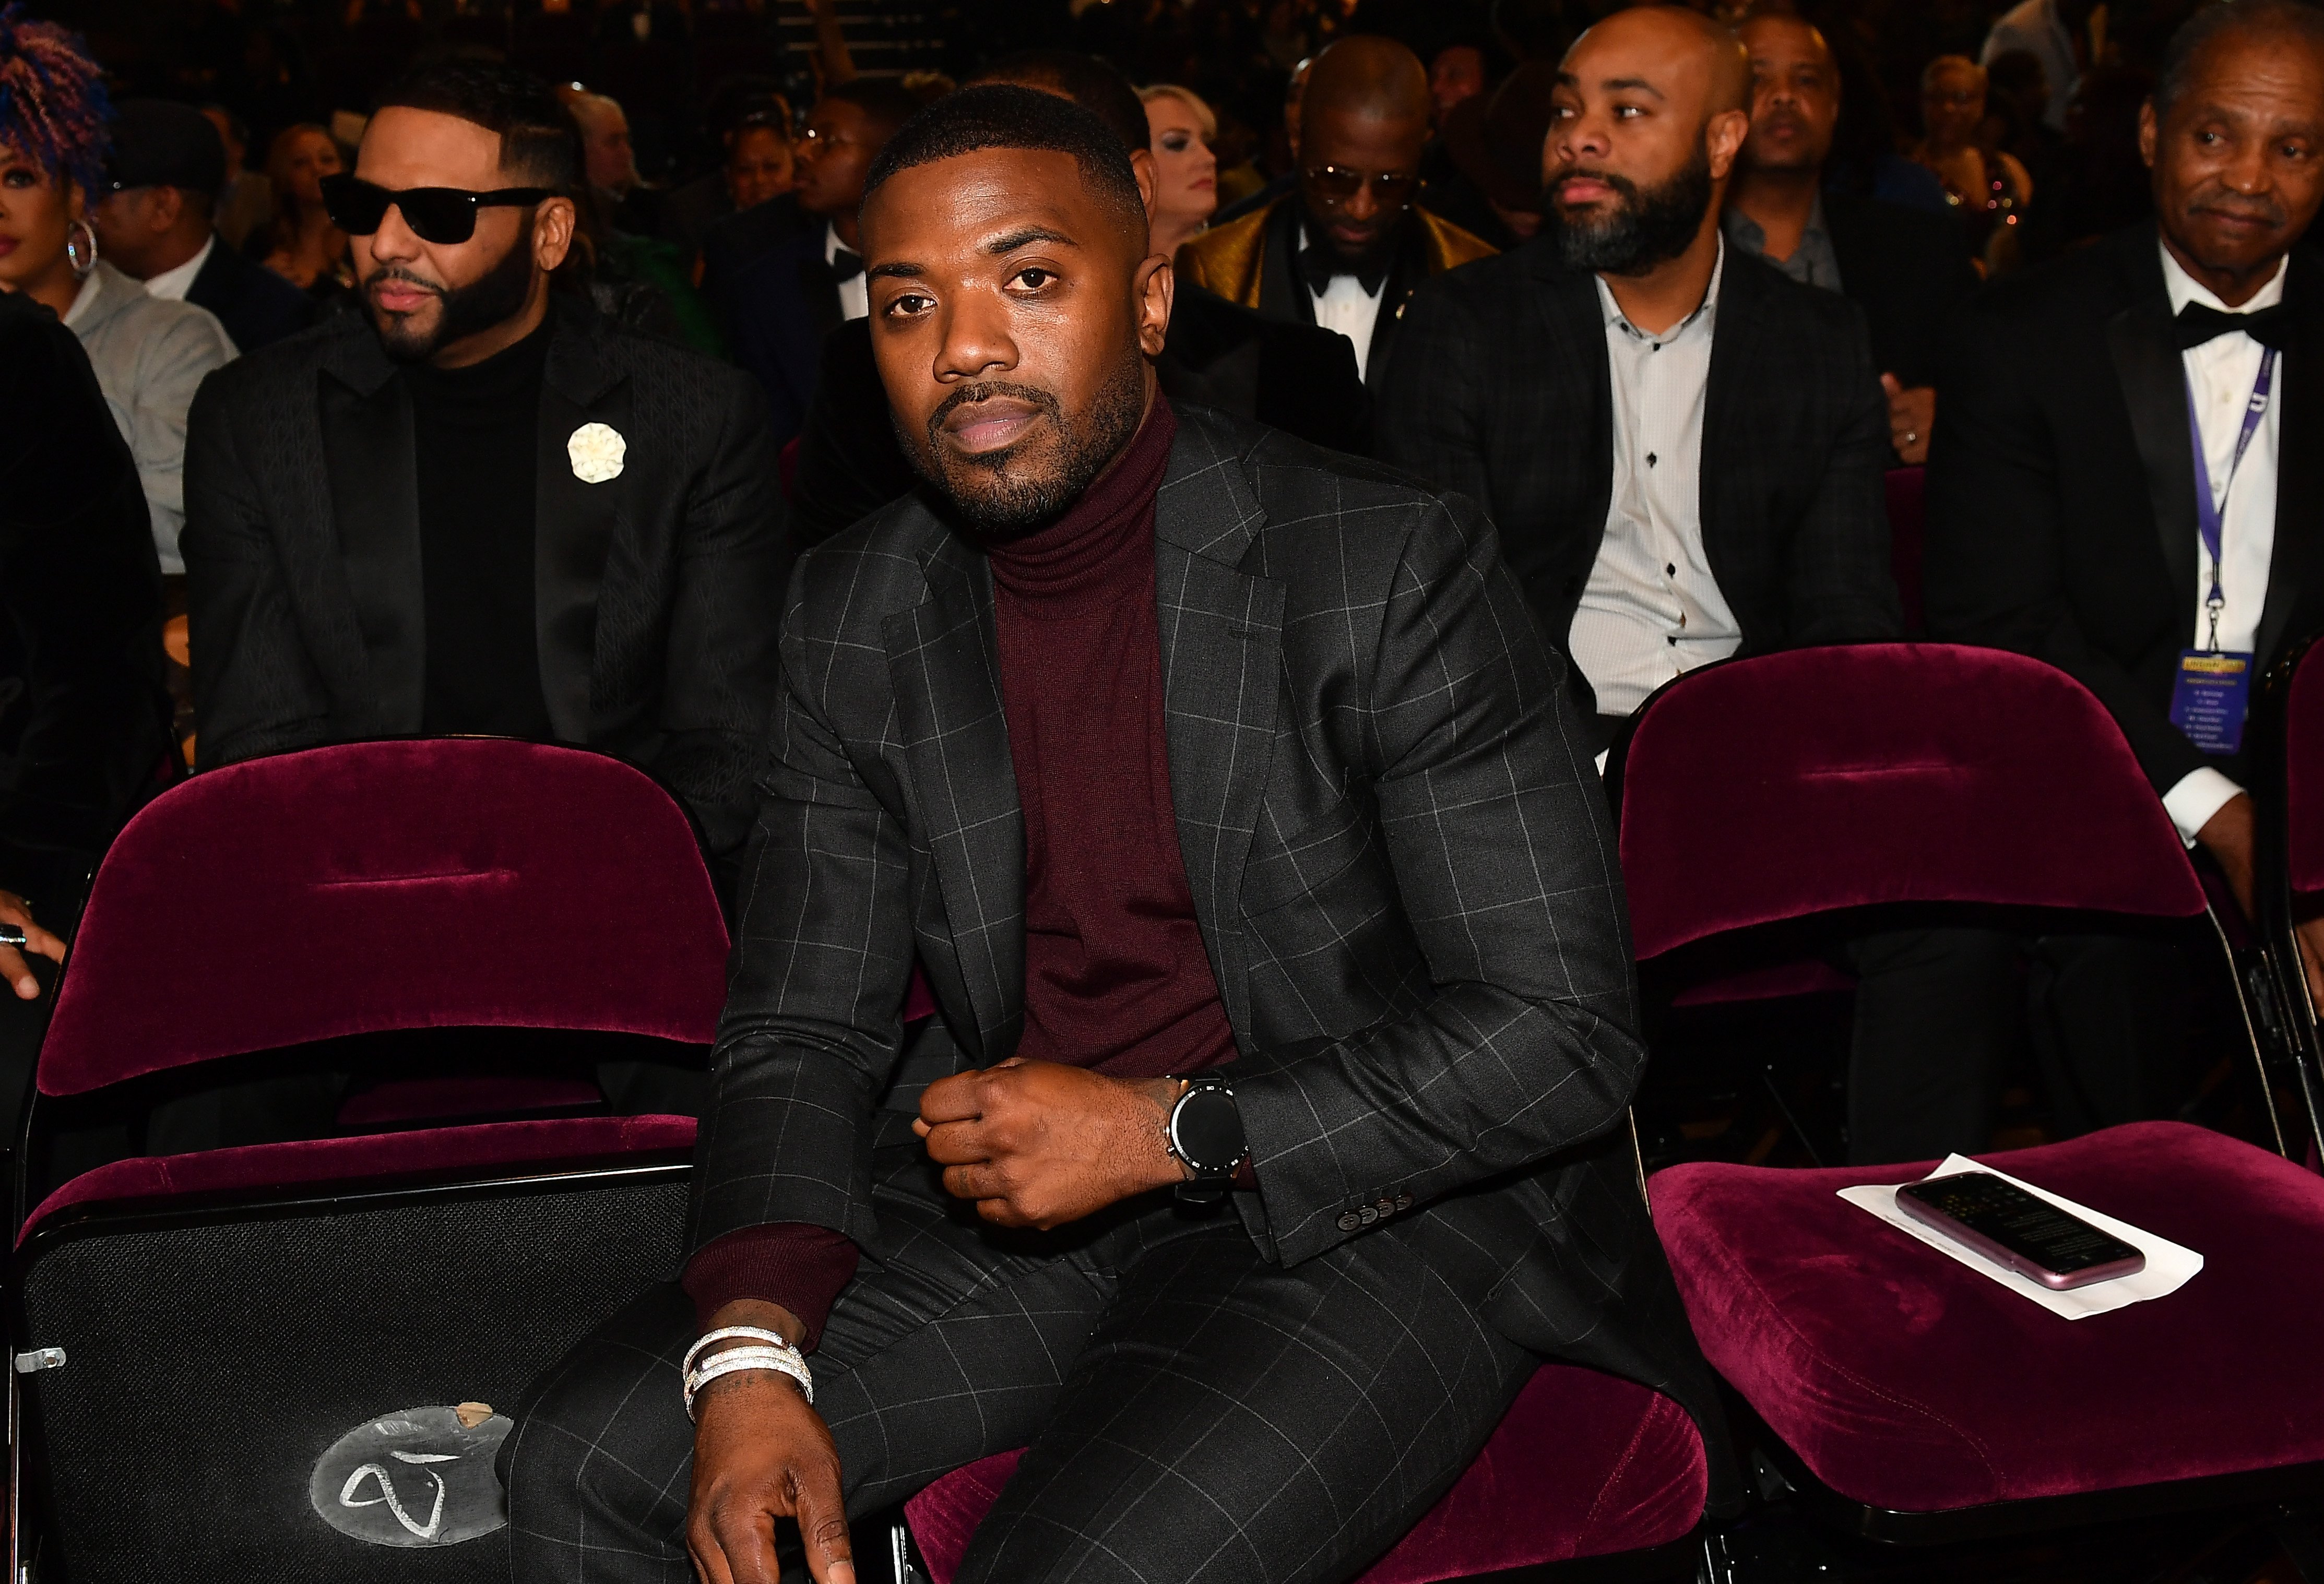 Ray J at the 2019 Urban One Honors show. | Photo: Getty Images